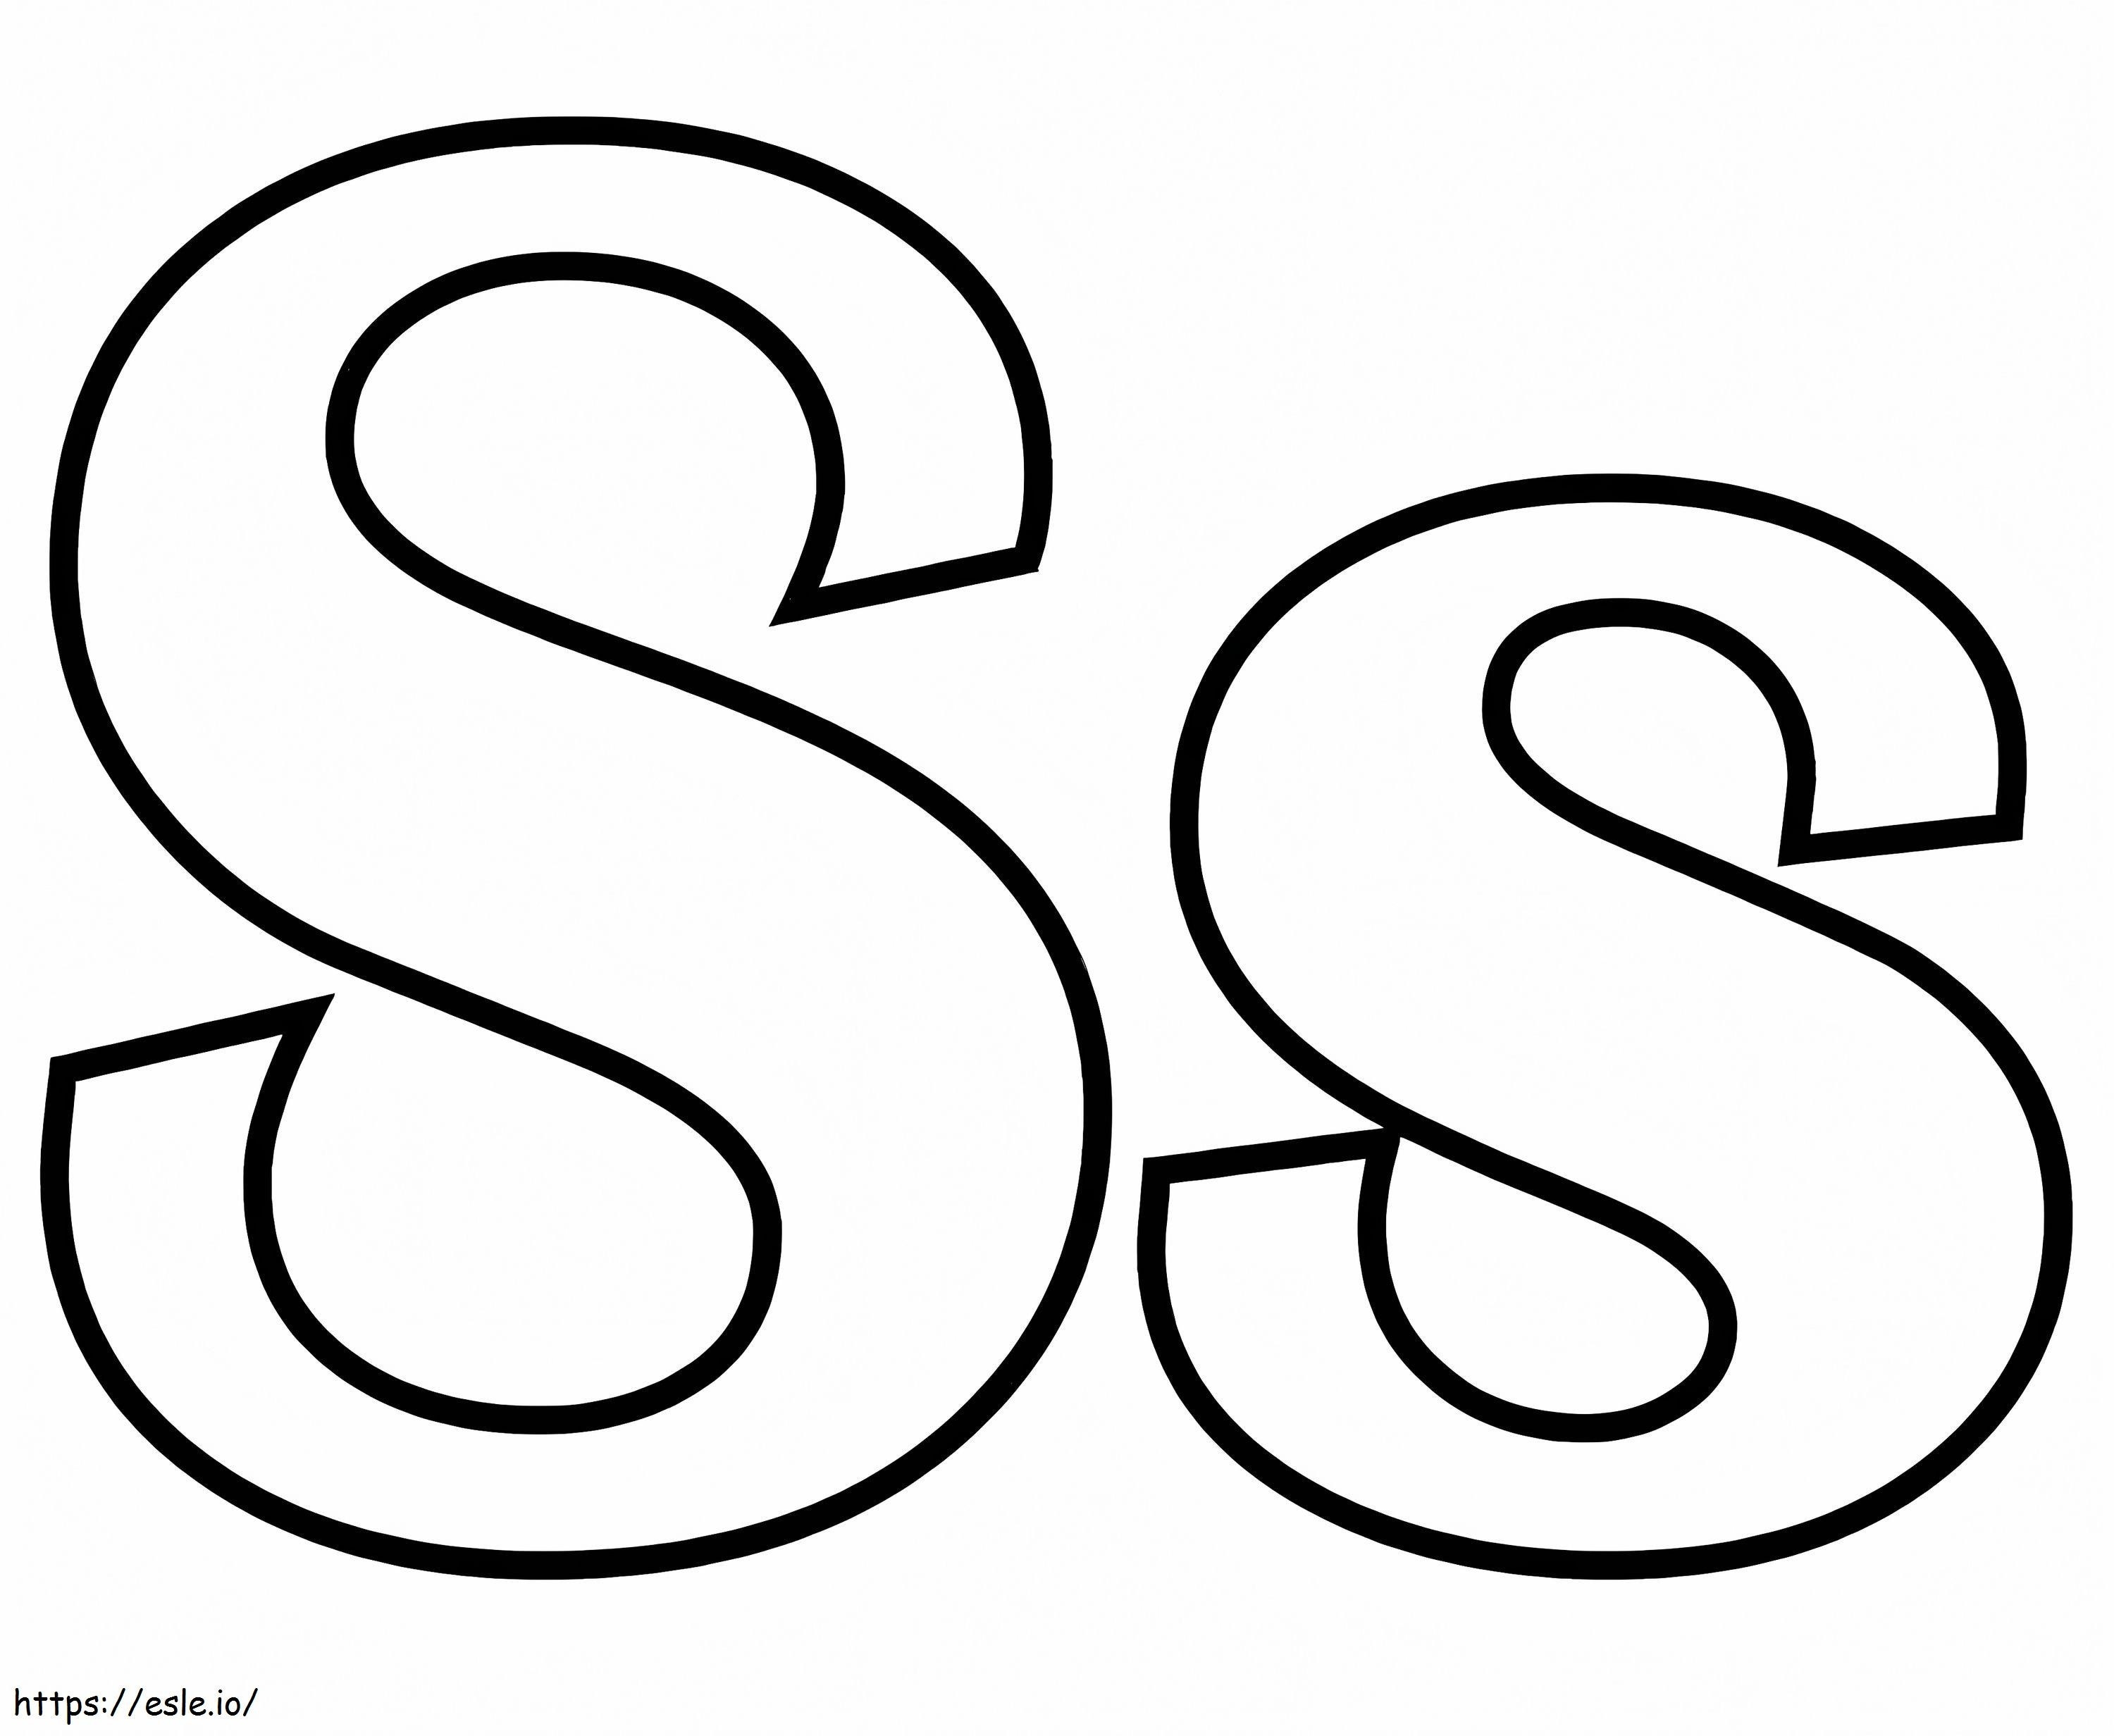 Letter S S coloring page